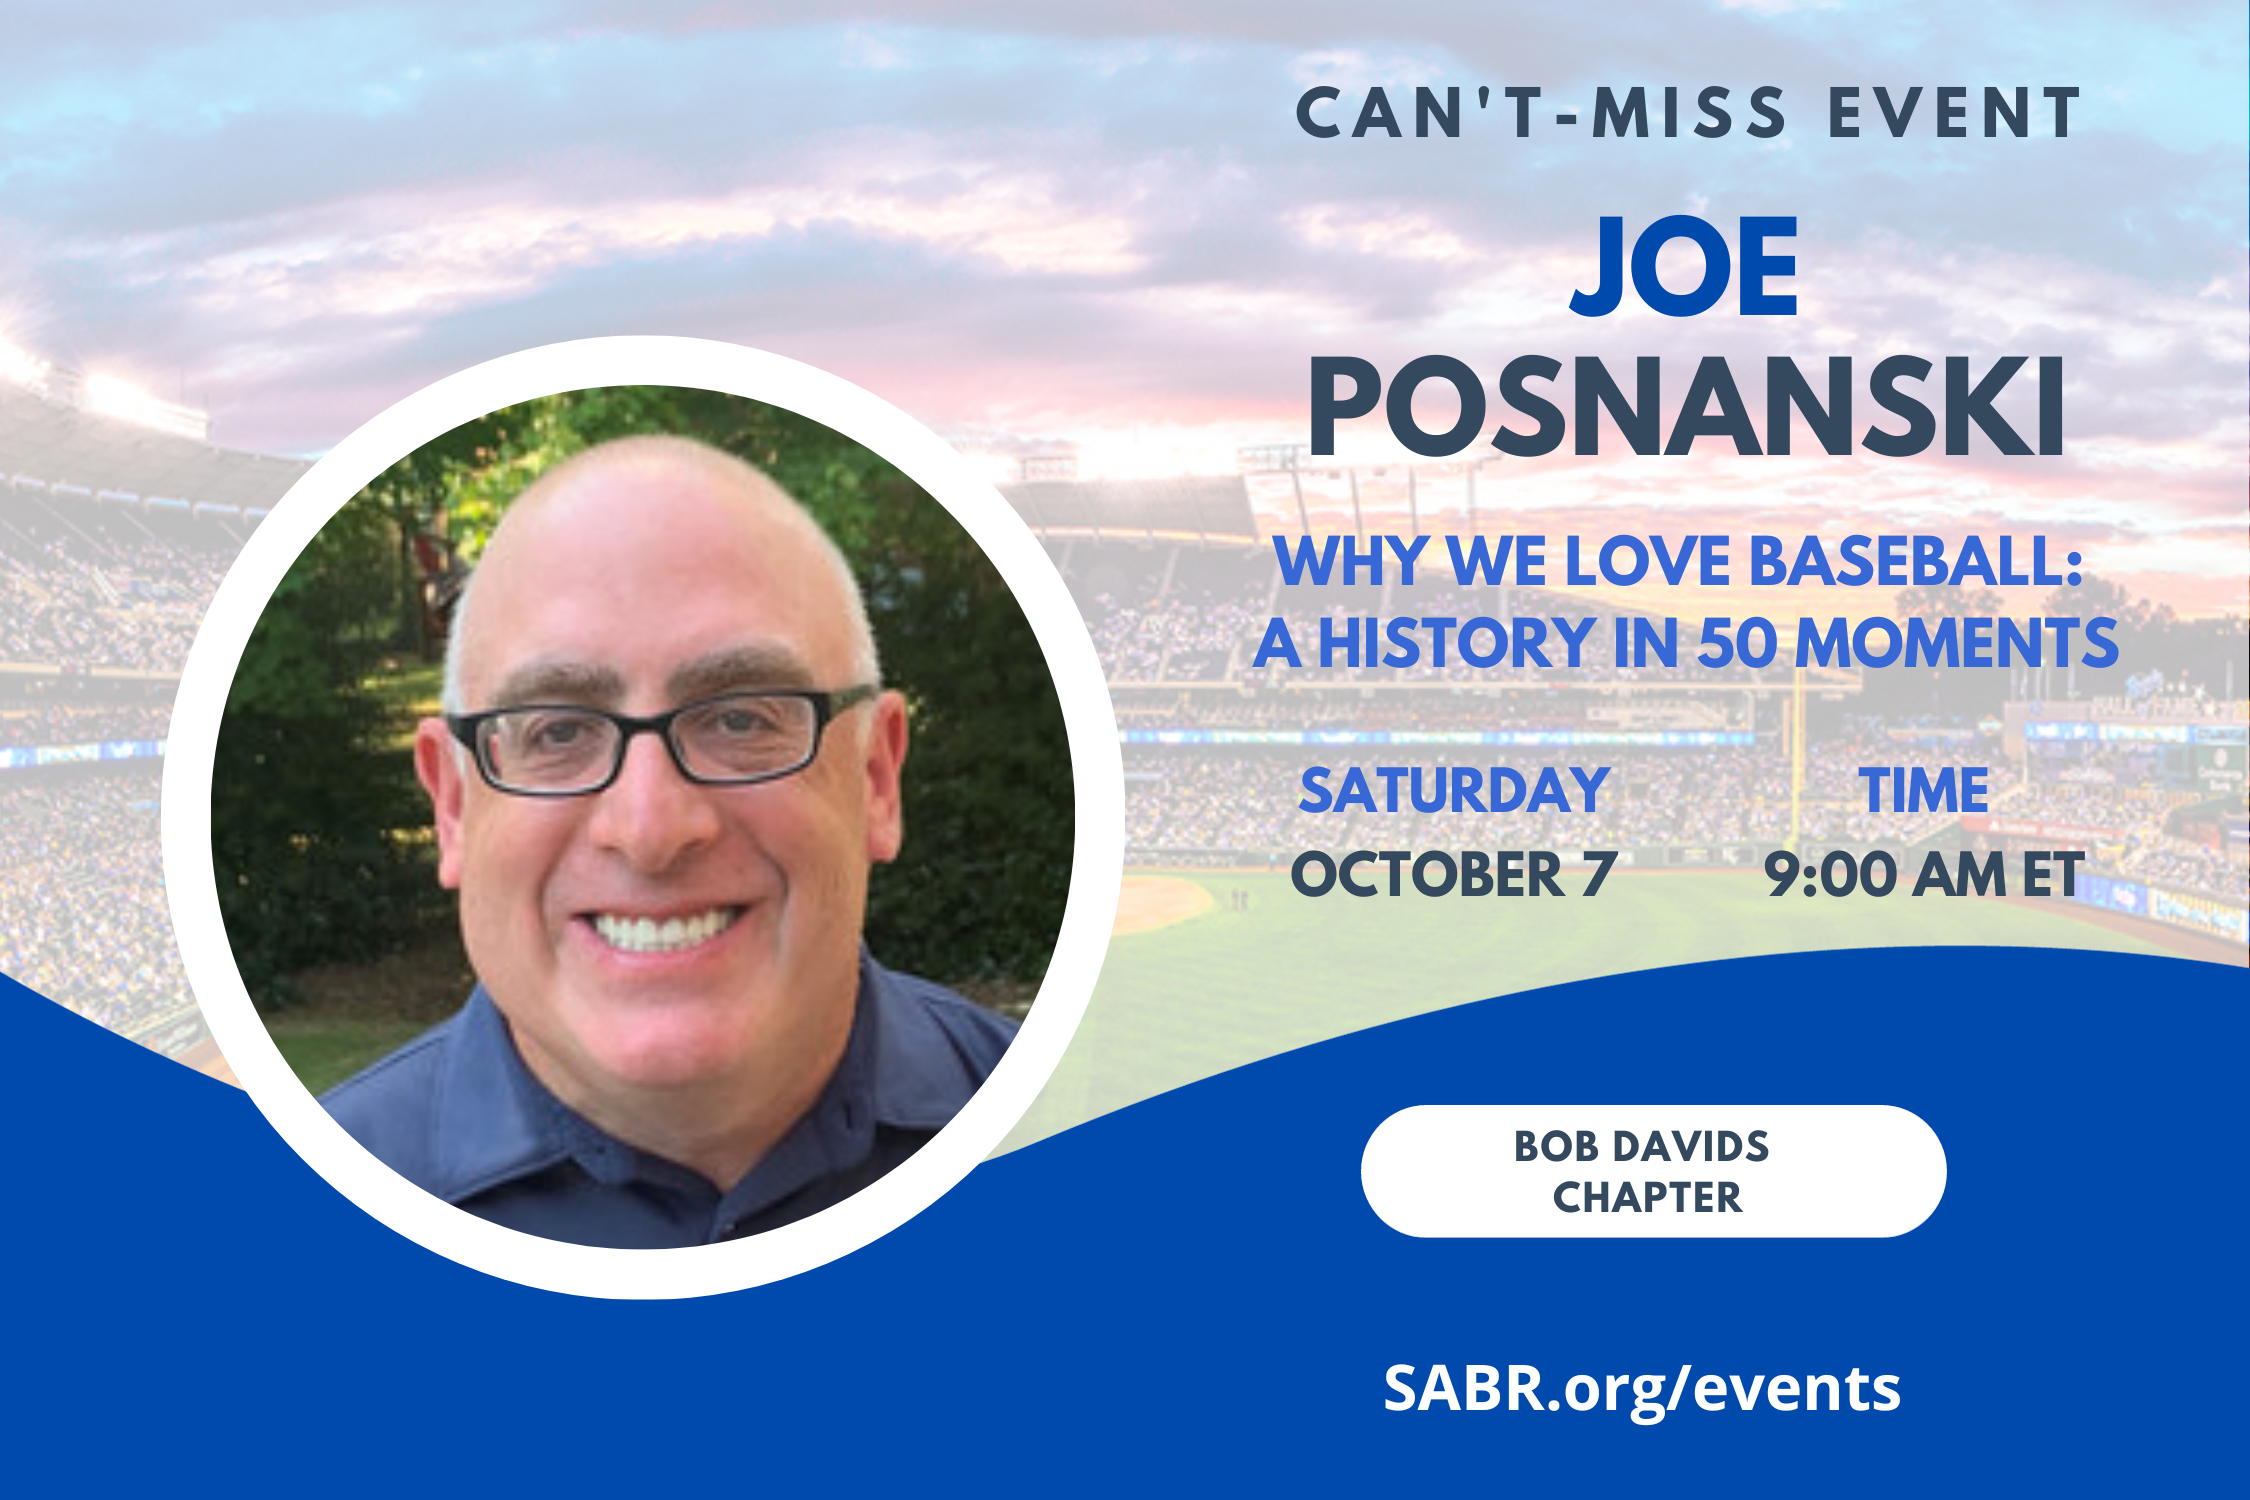 The next "Talkin' Baseball" meeting, hosted by the SABR Bob Davids Chapter in Washington D.C. and surrounding communities in Maryland and Virginia, will be held via Zoom at 9:00 a.m. Eastern on Saturday, October 7 2023. All baseball fans are welcome to attend. Our speaker will be SABR member Joe Posnanski, New York Times bestselling author of Why We Love Baseball: A History in 50 Moments and The Baseball 100.